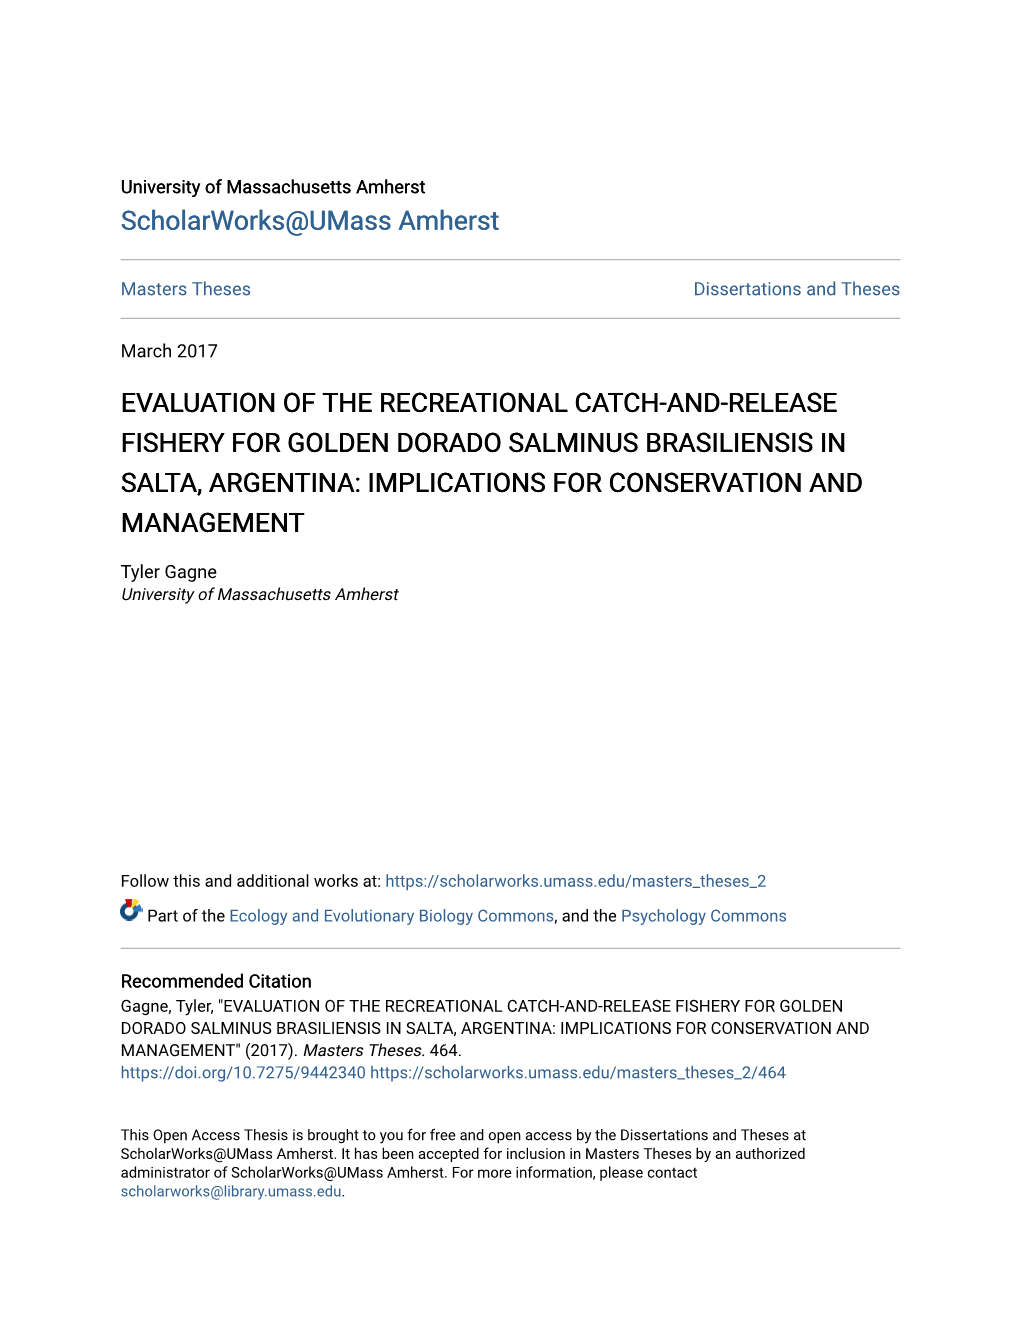 Evaluation of the Recreational Catch-And-Release Fishery for Golden Dorado Salminus Brasiliensis in Salta, Argentina: Implications for Conservation and Management